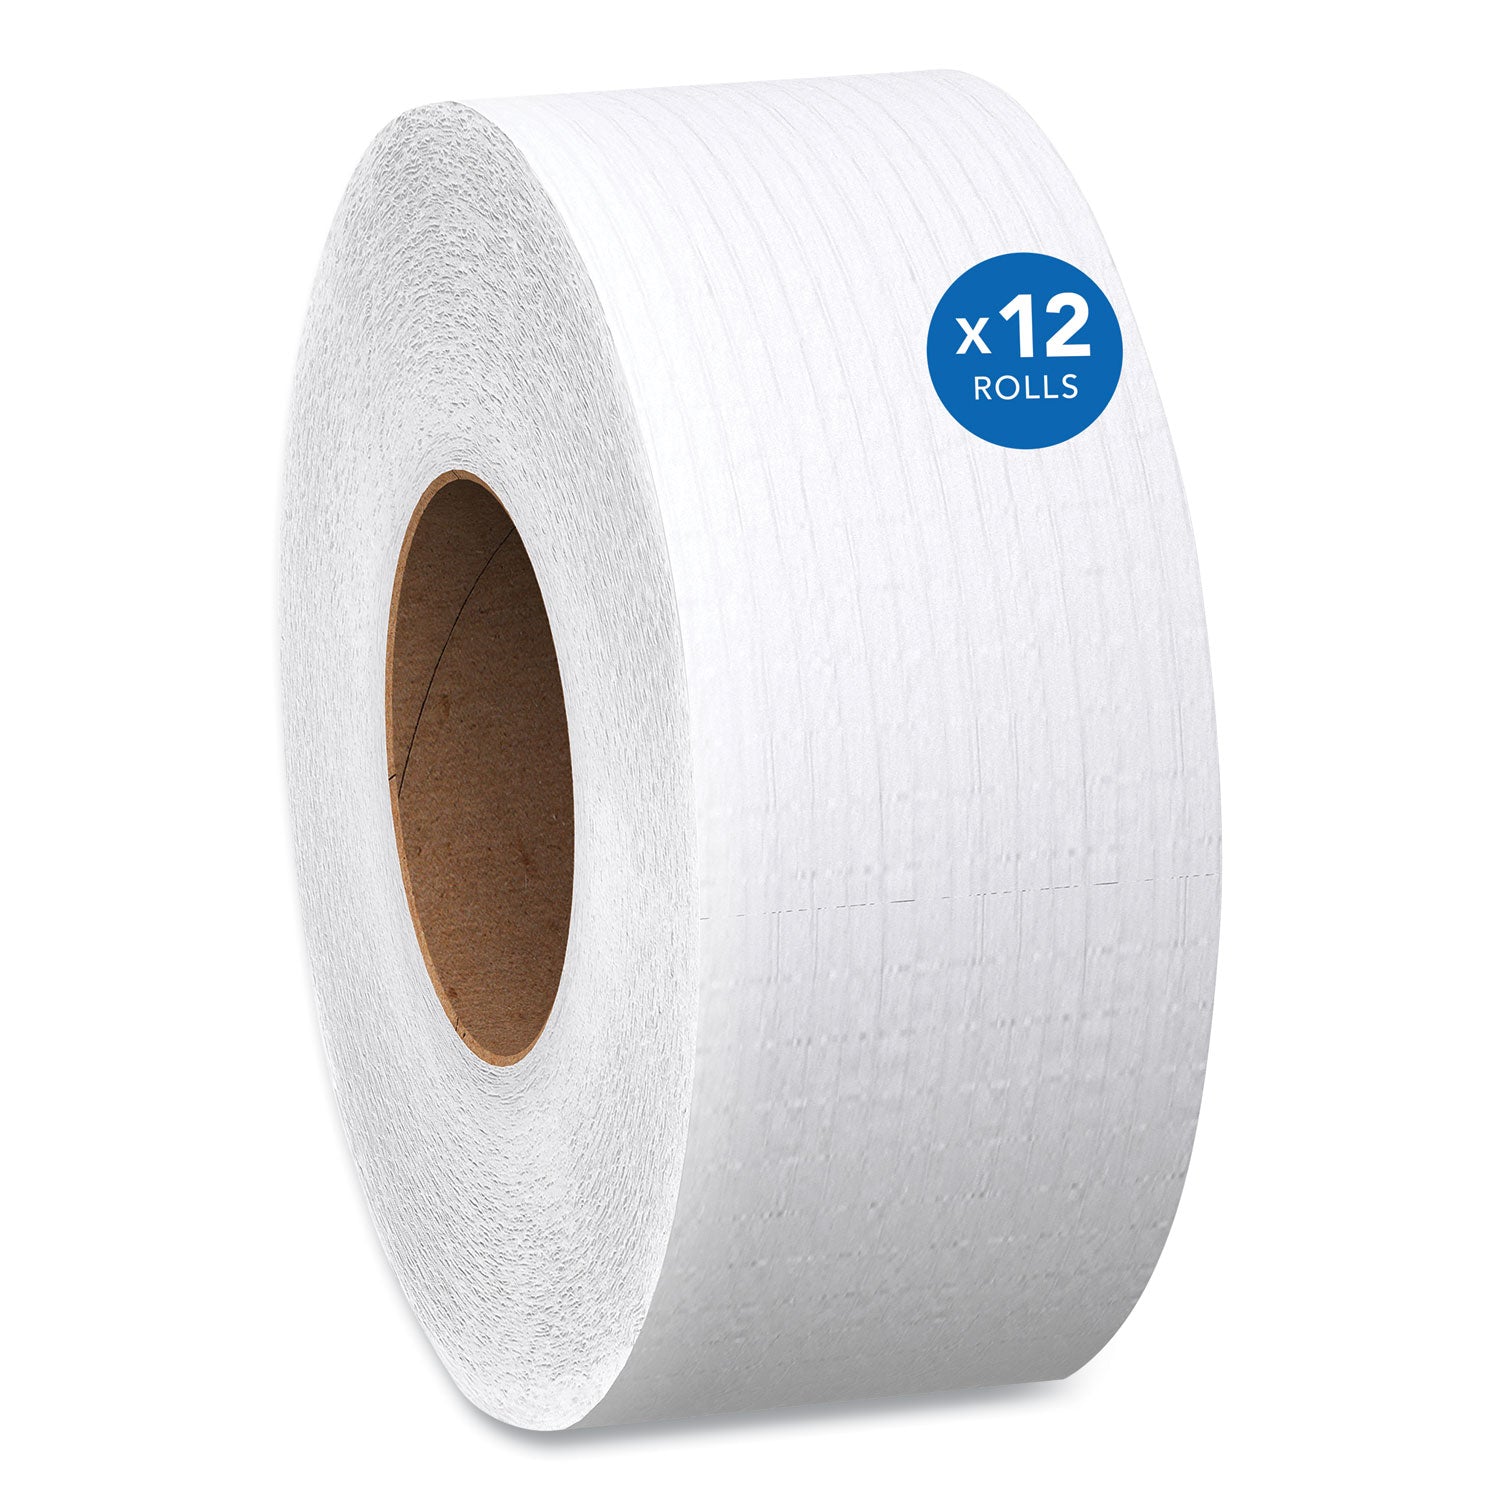 Essential 100% Recycled Fiber JRT Bathroom Tissue for Business, Septic Safe, 2-Ply, White, 3.55" x 1,000 ft, 12 Rolls/Carton - 